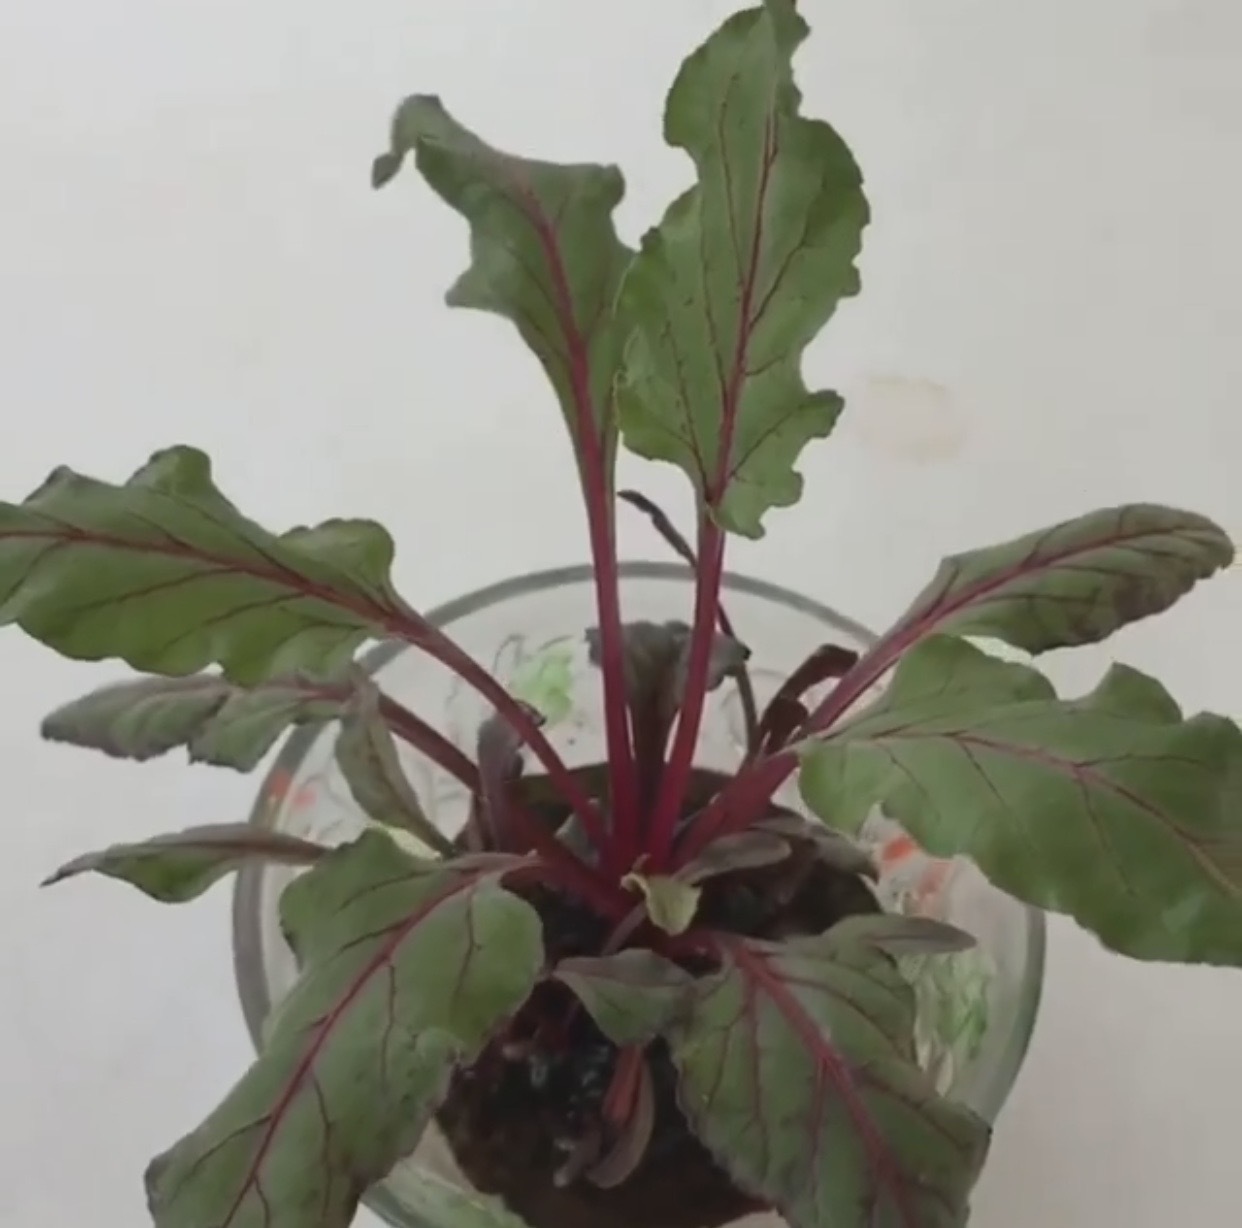 Beetroot greens for salads, soup or pasta